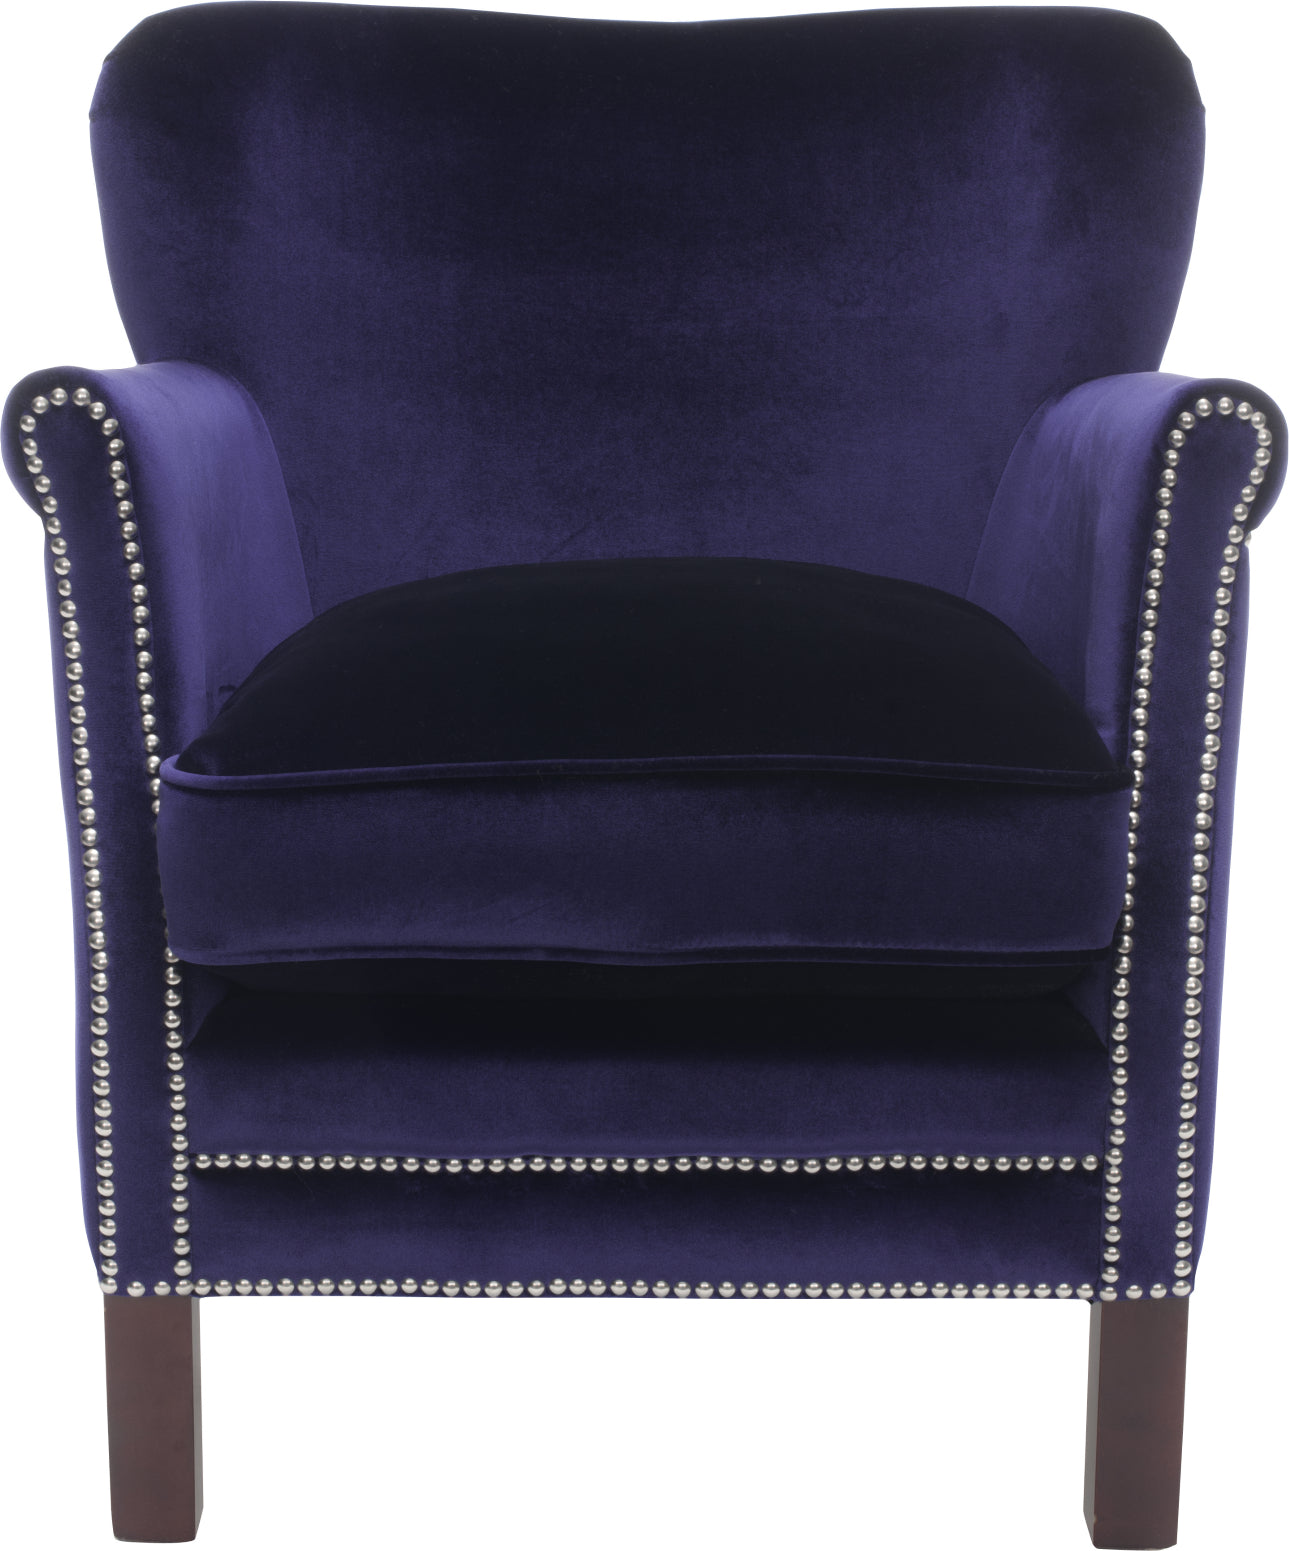 Safavieh Jenny Arm Chair With Silver Nail Heads Royal Blue and Cherry Mahogany Furniture main image